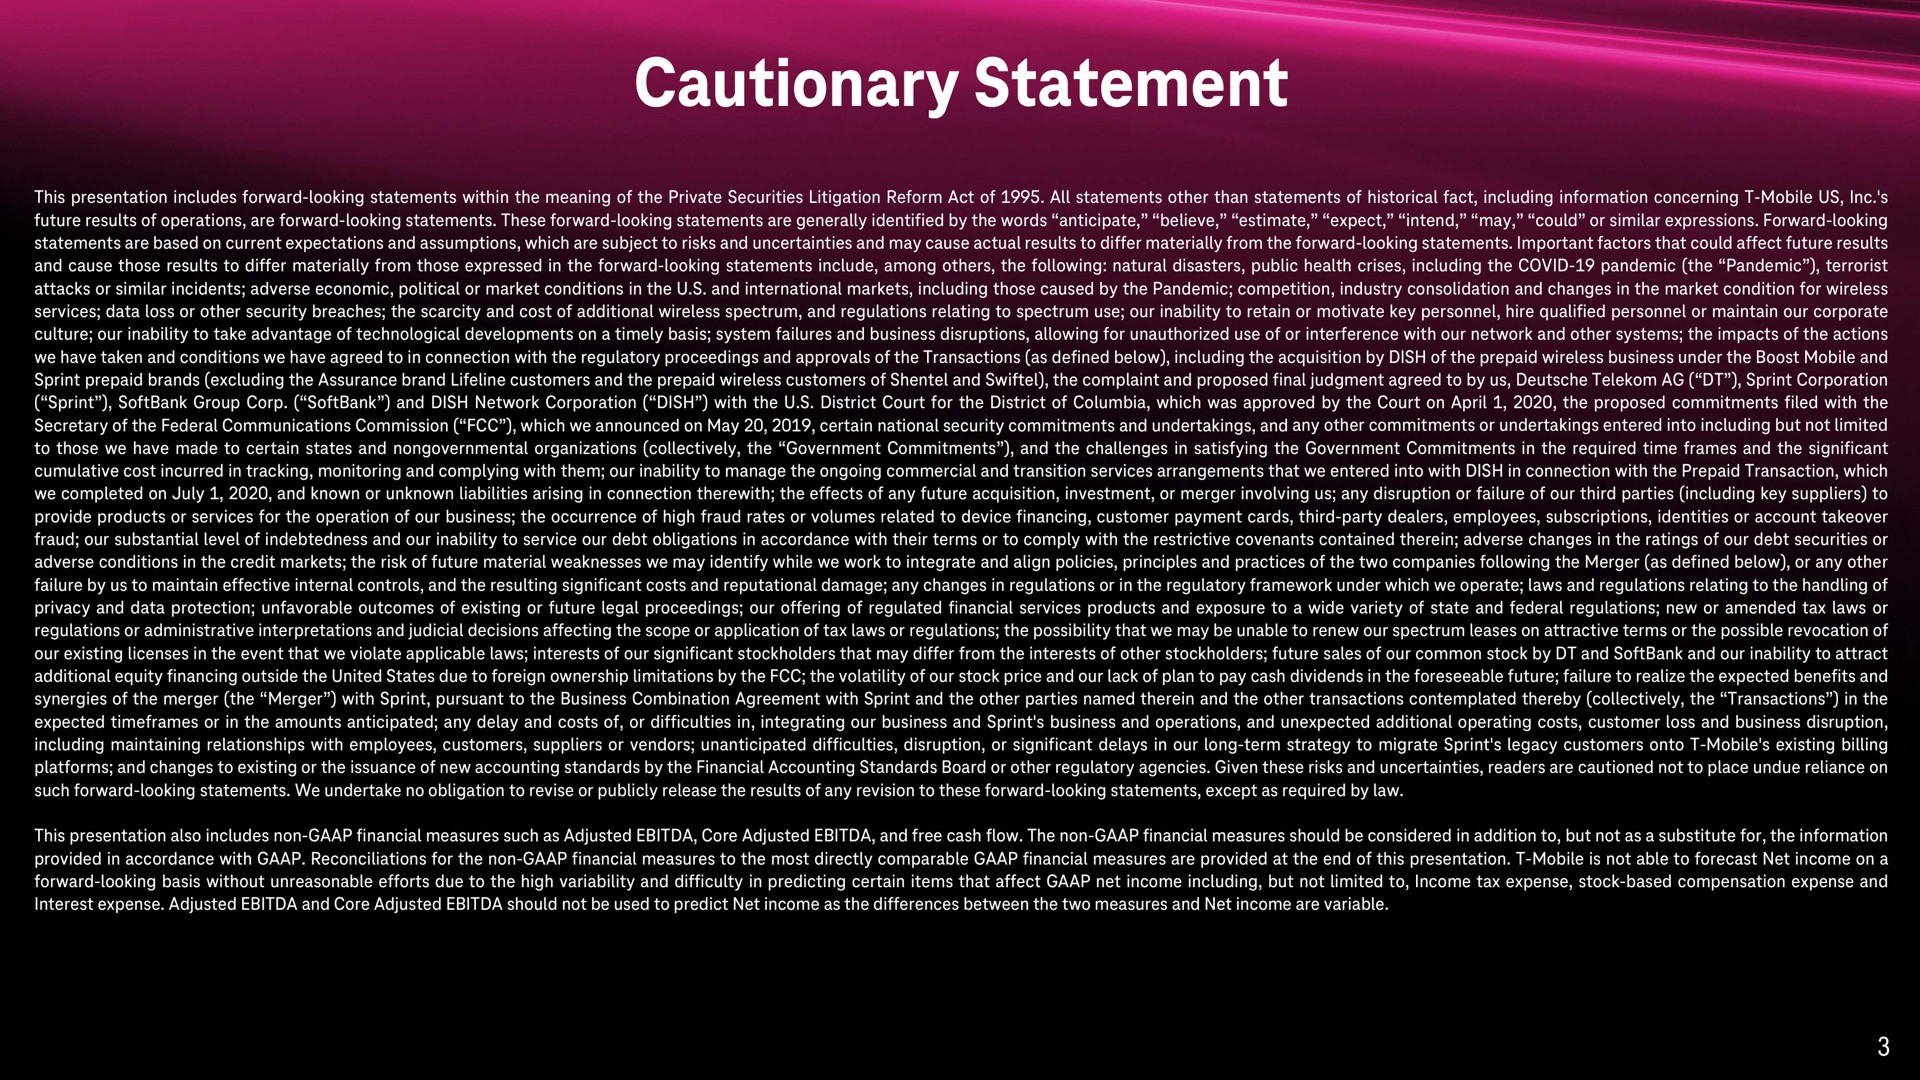 cautionary statement | T-Mobile